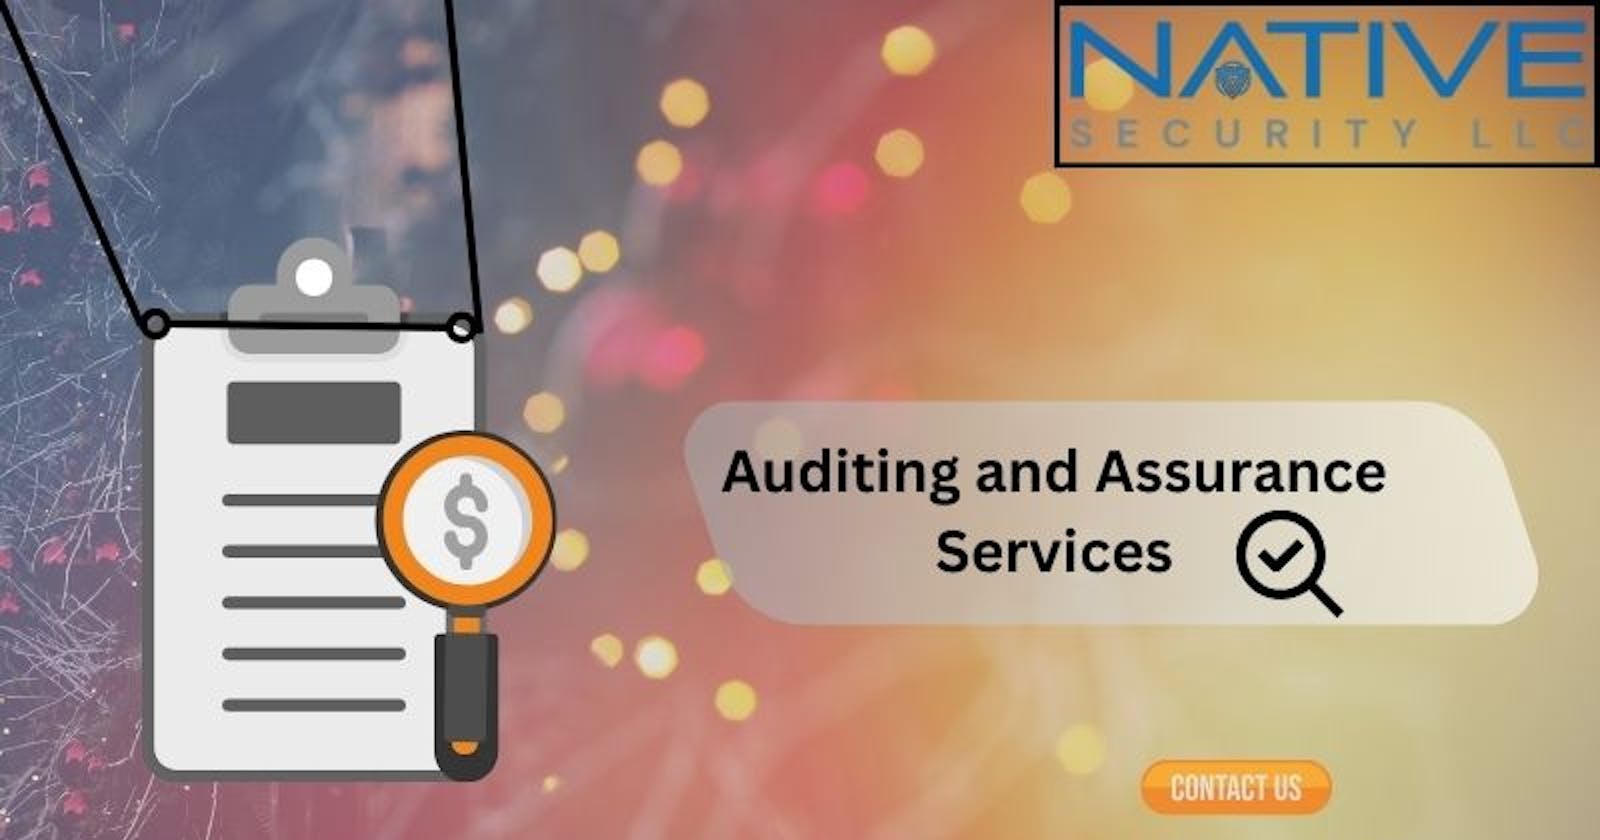 Auditing and Assurance Services for Tribal Nations